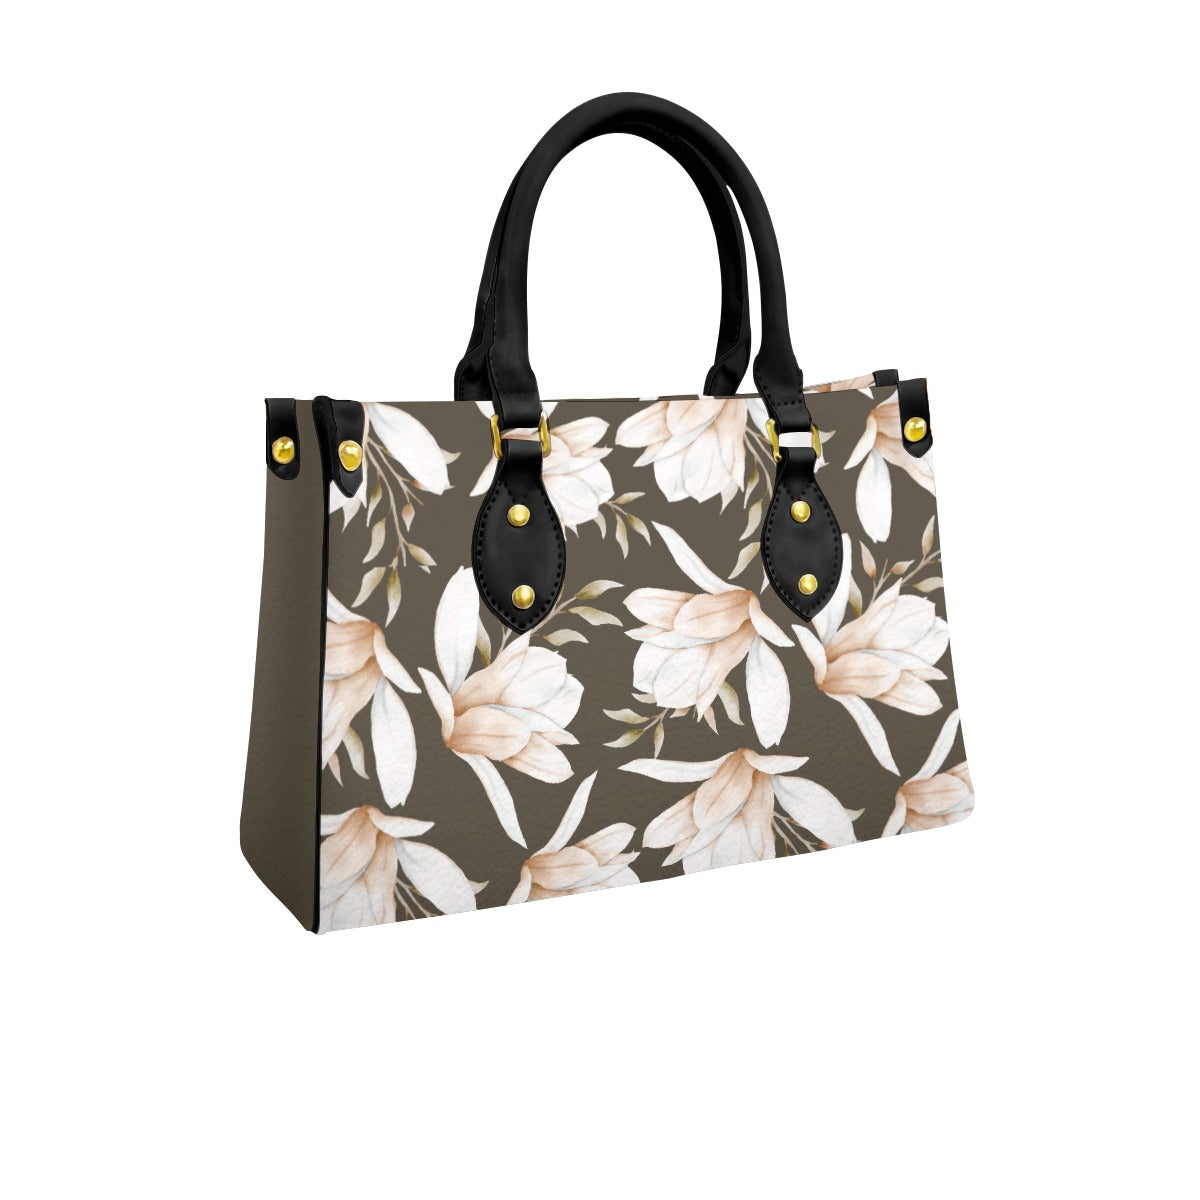 Women's Tote Bag With Black Handle brown background and off white flower pattern